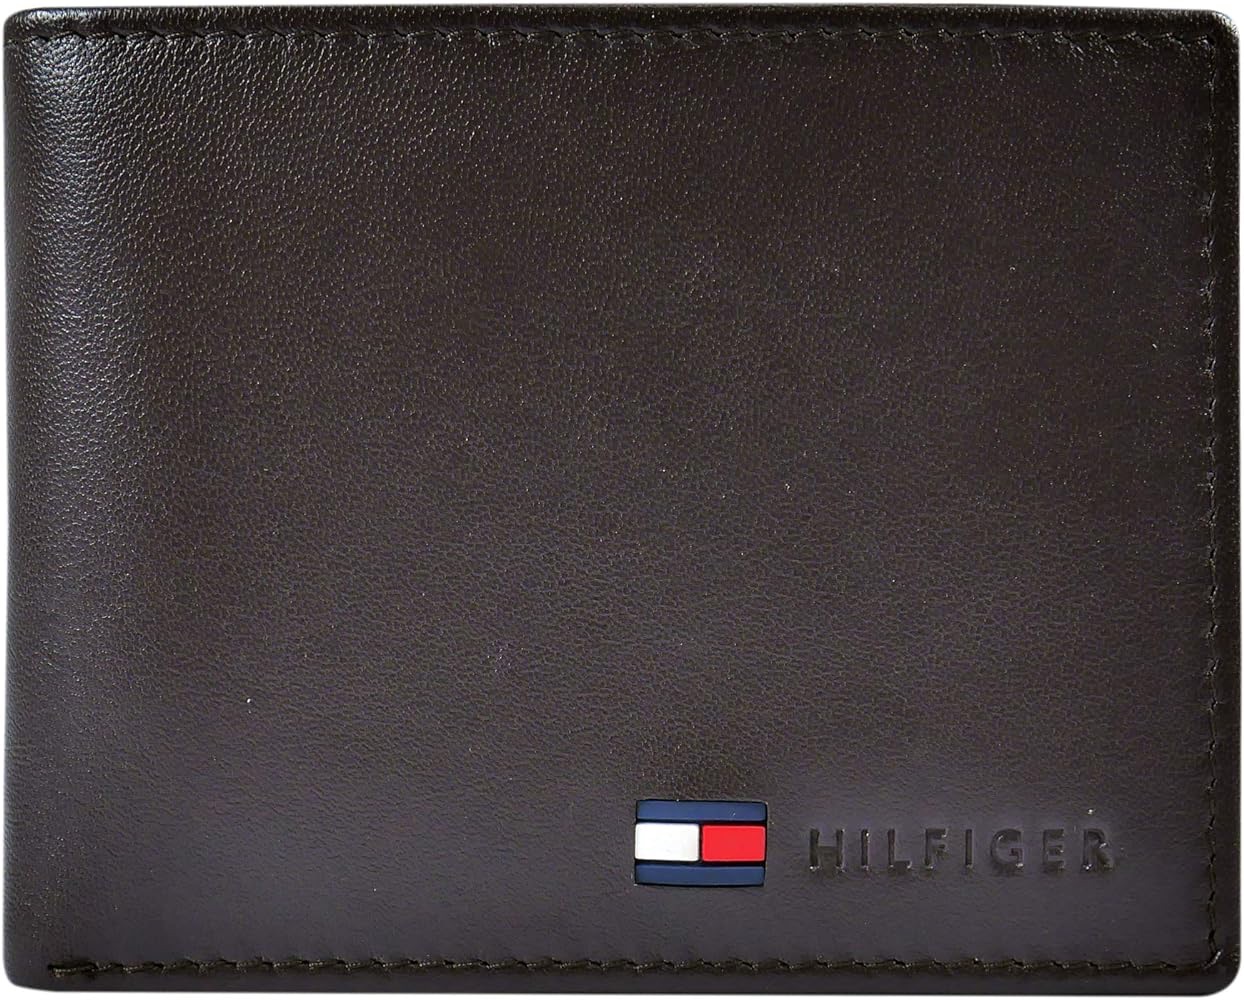 Tommy Hilfiger Men's Leather Wallet - Thin Sleek Casual Bifold with 6 Credit Card Pockets and Removable ID Window, British Brown at Amazon Men’s Clothing store